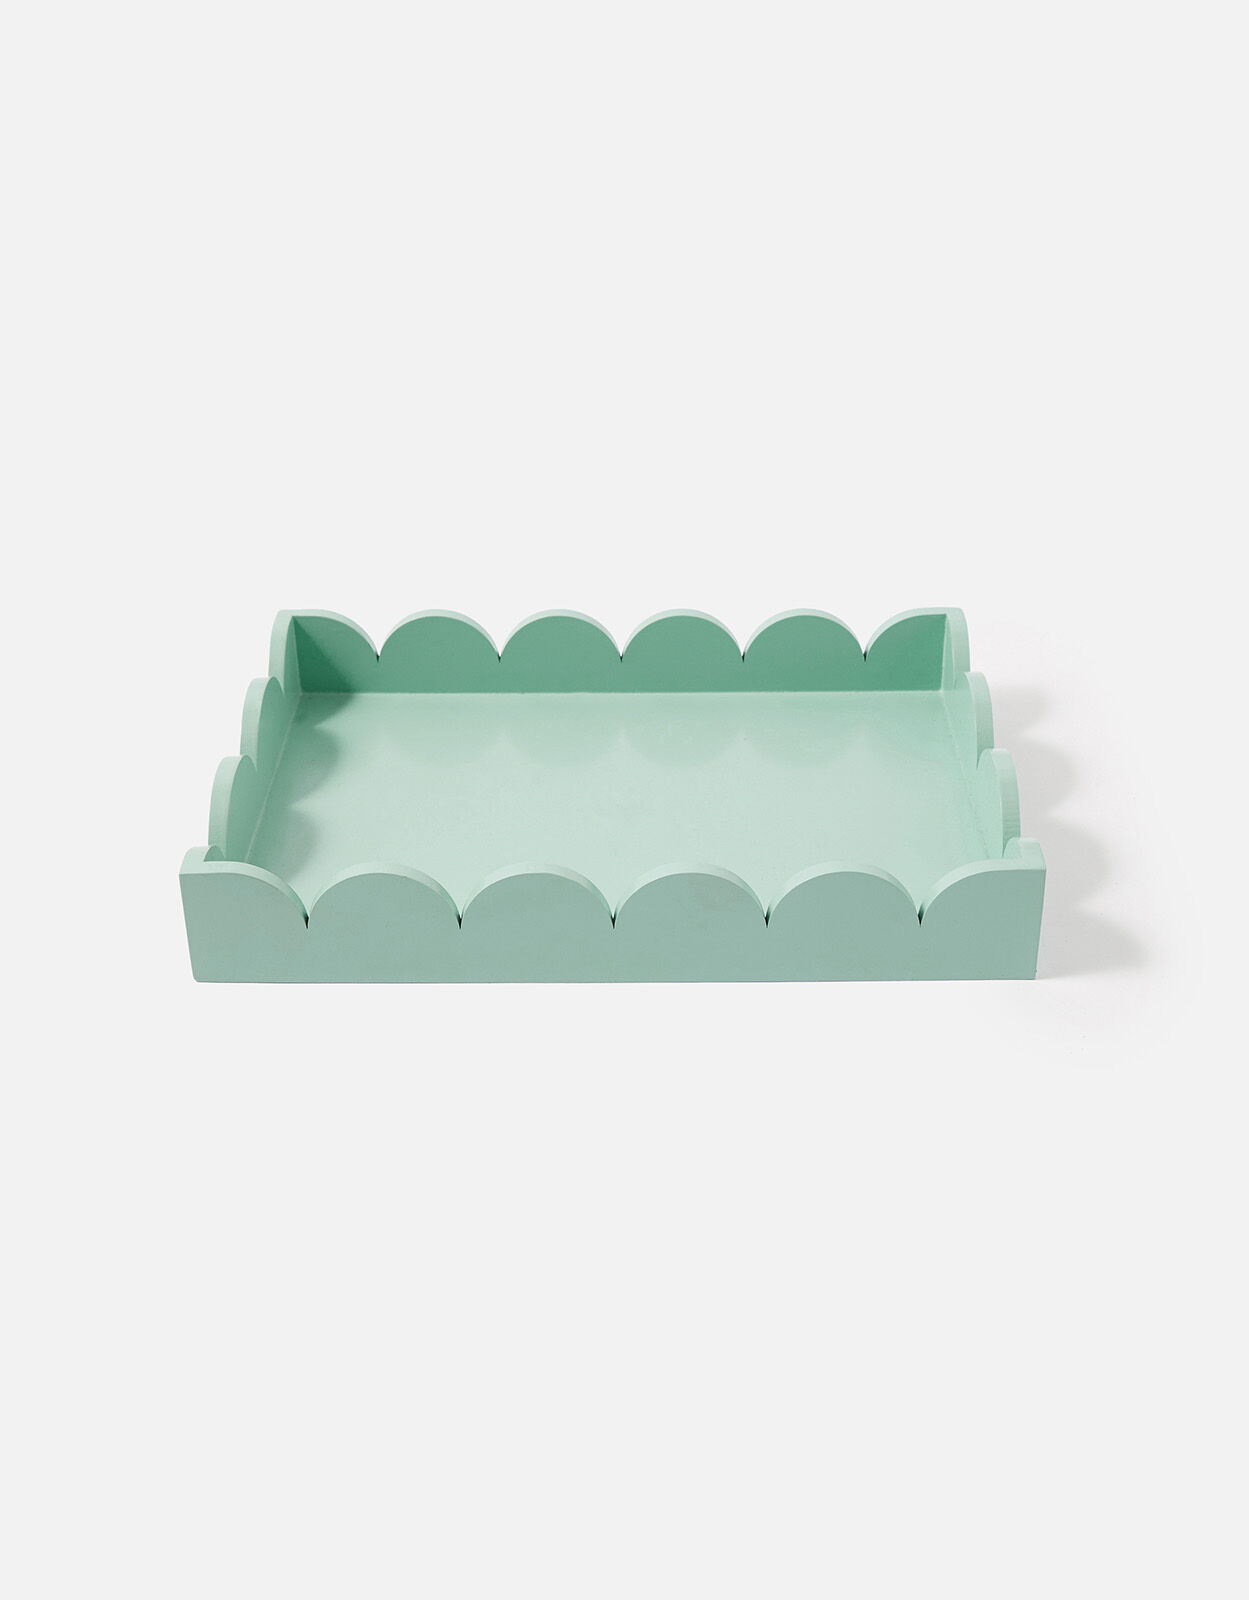 *NEW* ACCESSORIZE HOME Large scallop tray mint green lacquer lacquered scalloped 